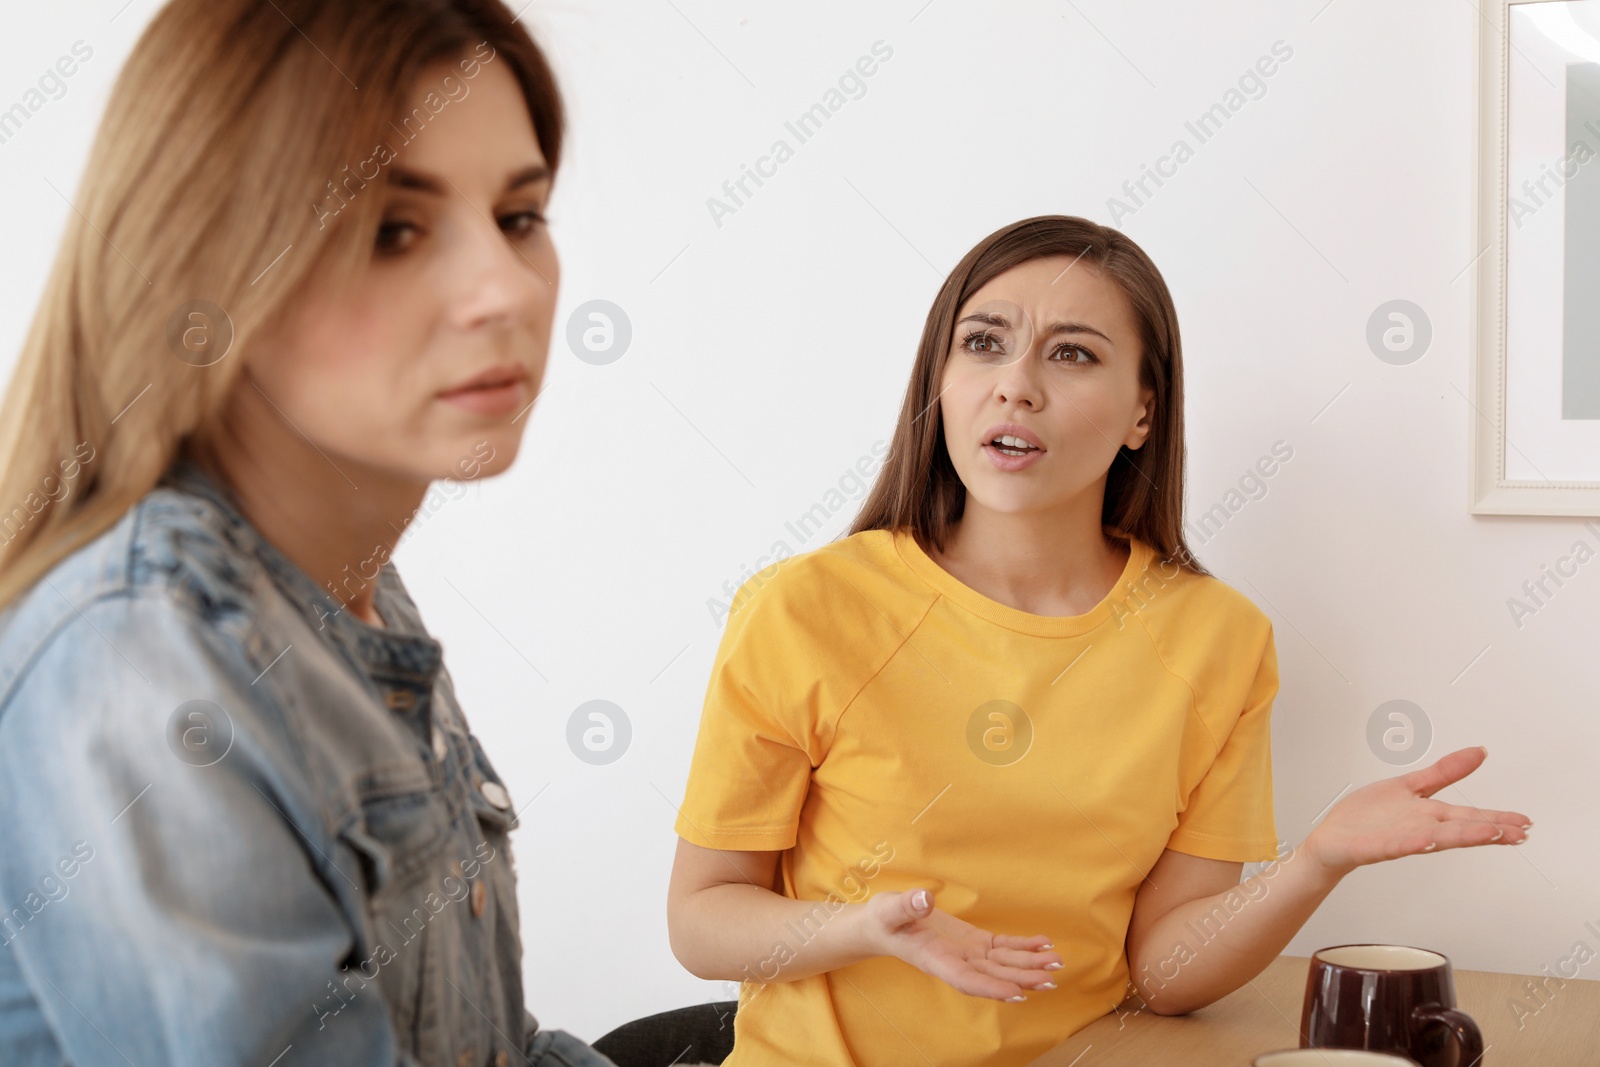 Photo of Women arguing at table in room